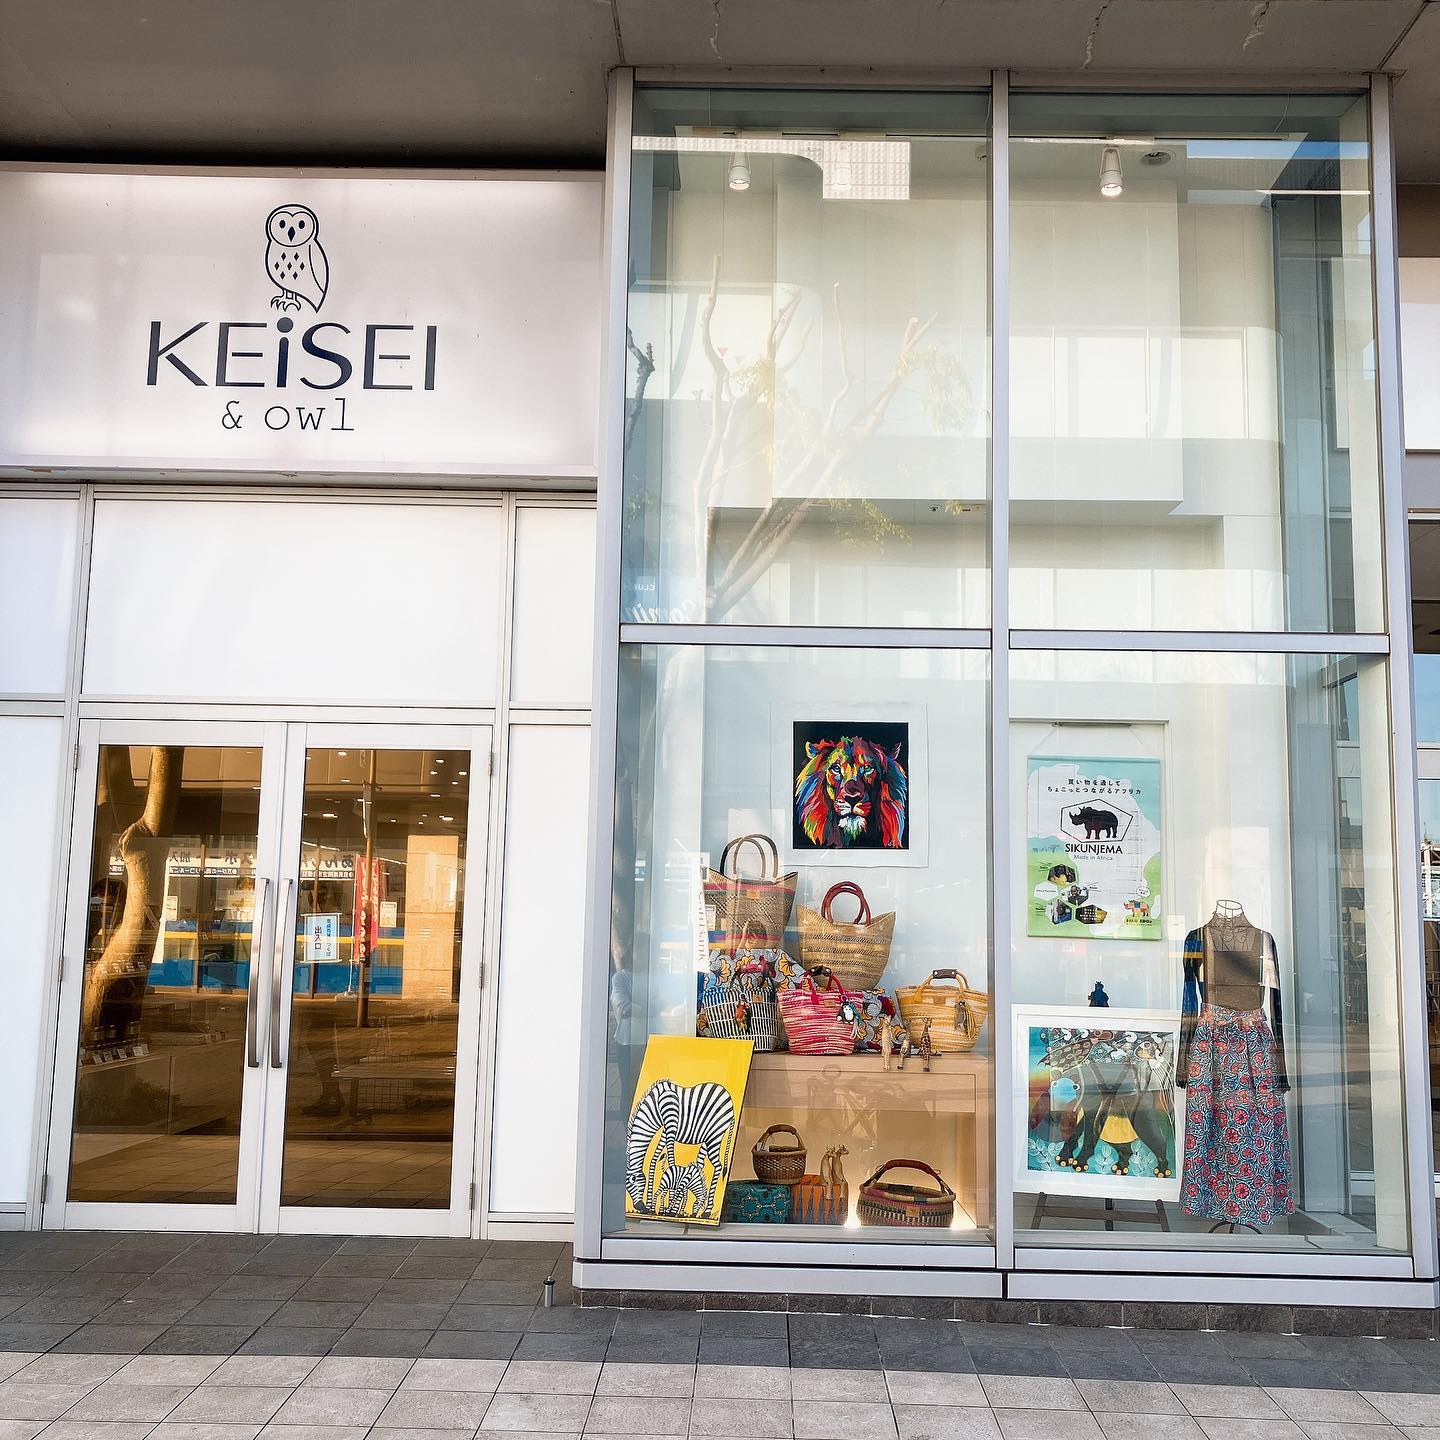 KEISEI & OWLへ搬入してきました!page-visual KEISEI & OWLへ搬入してきました!ビジュアル